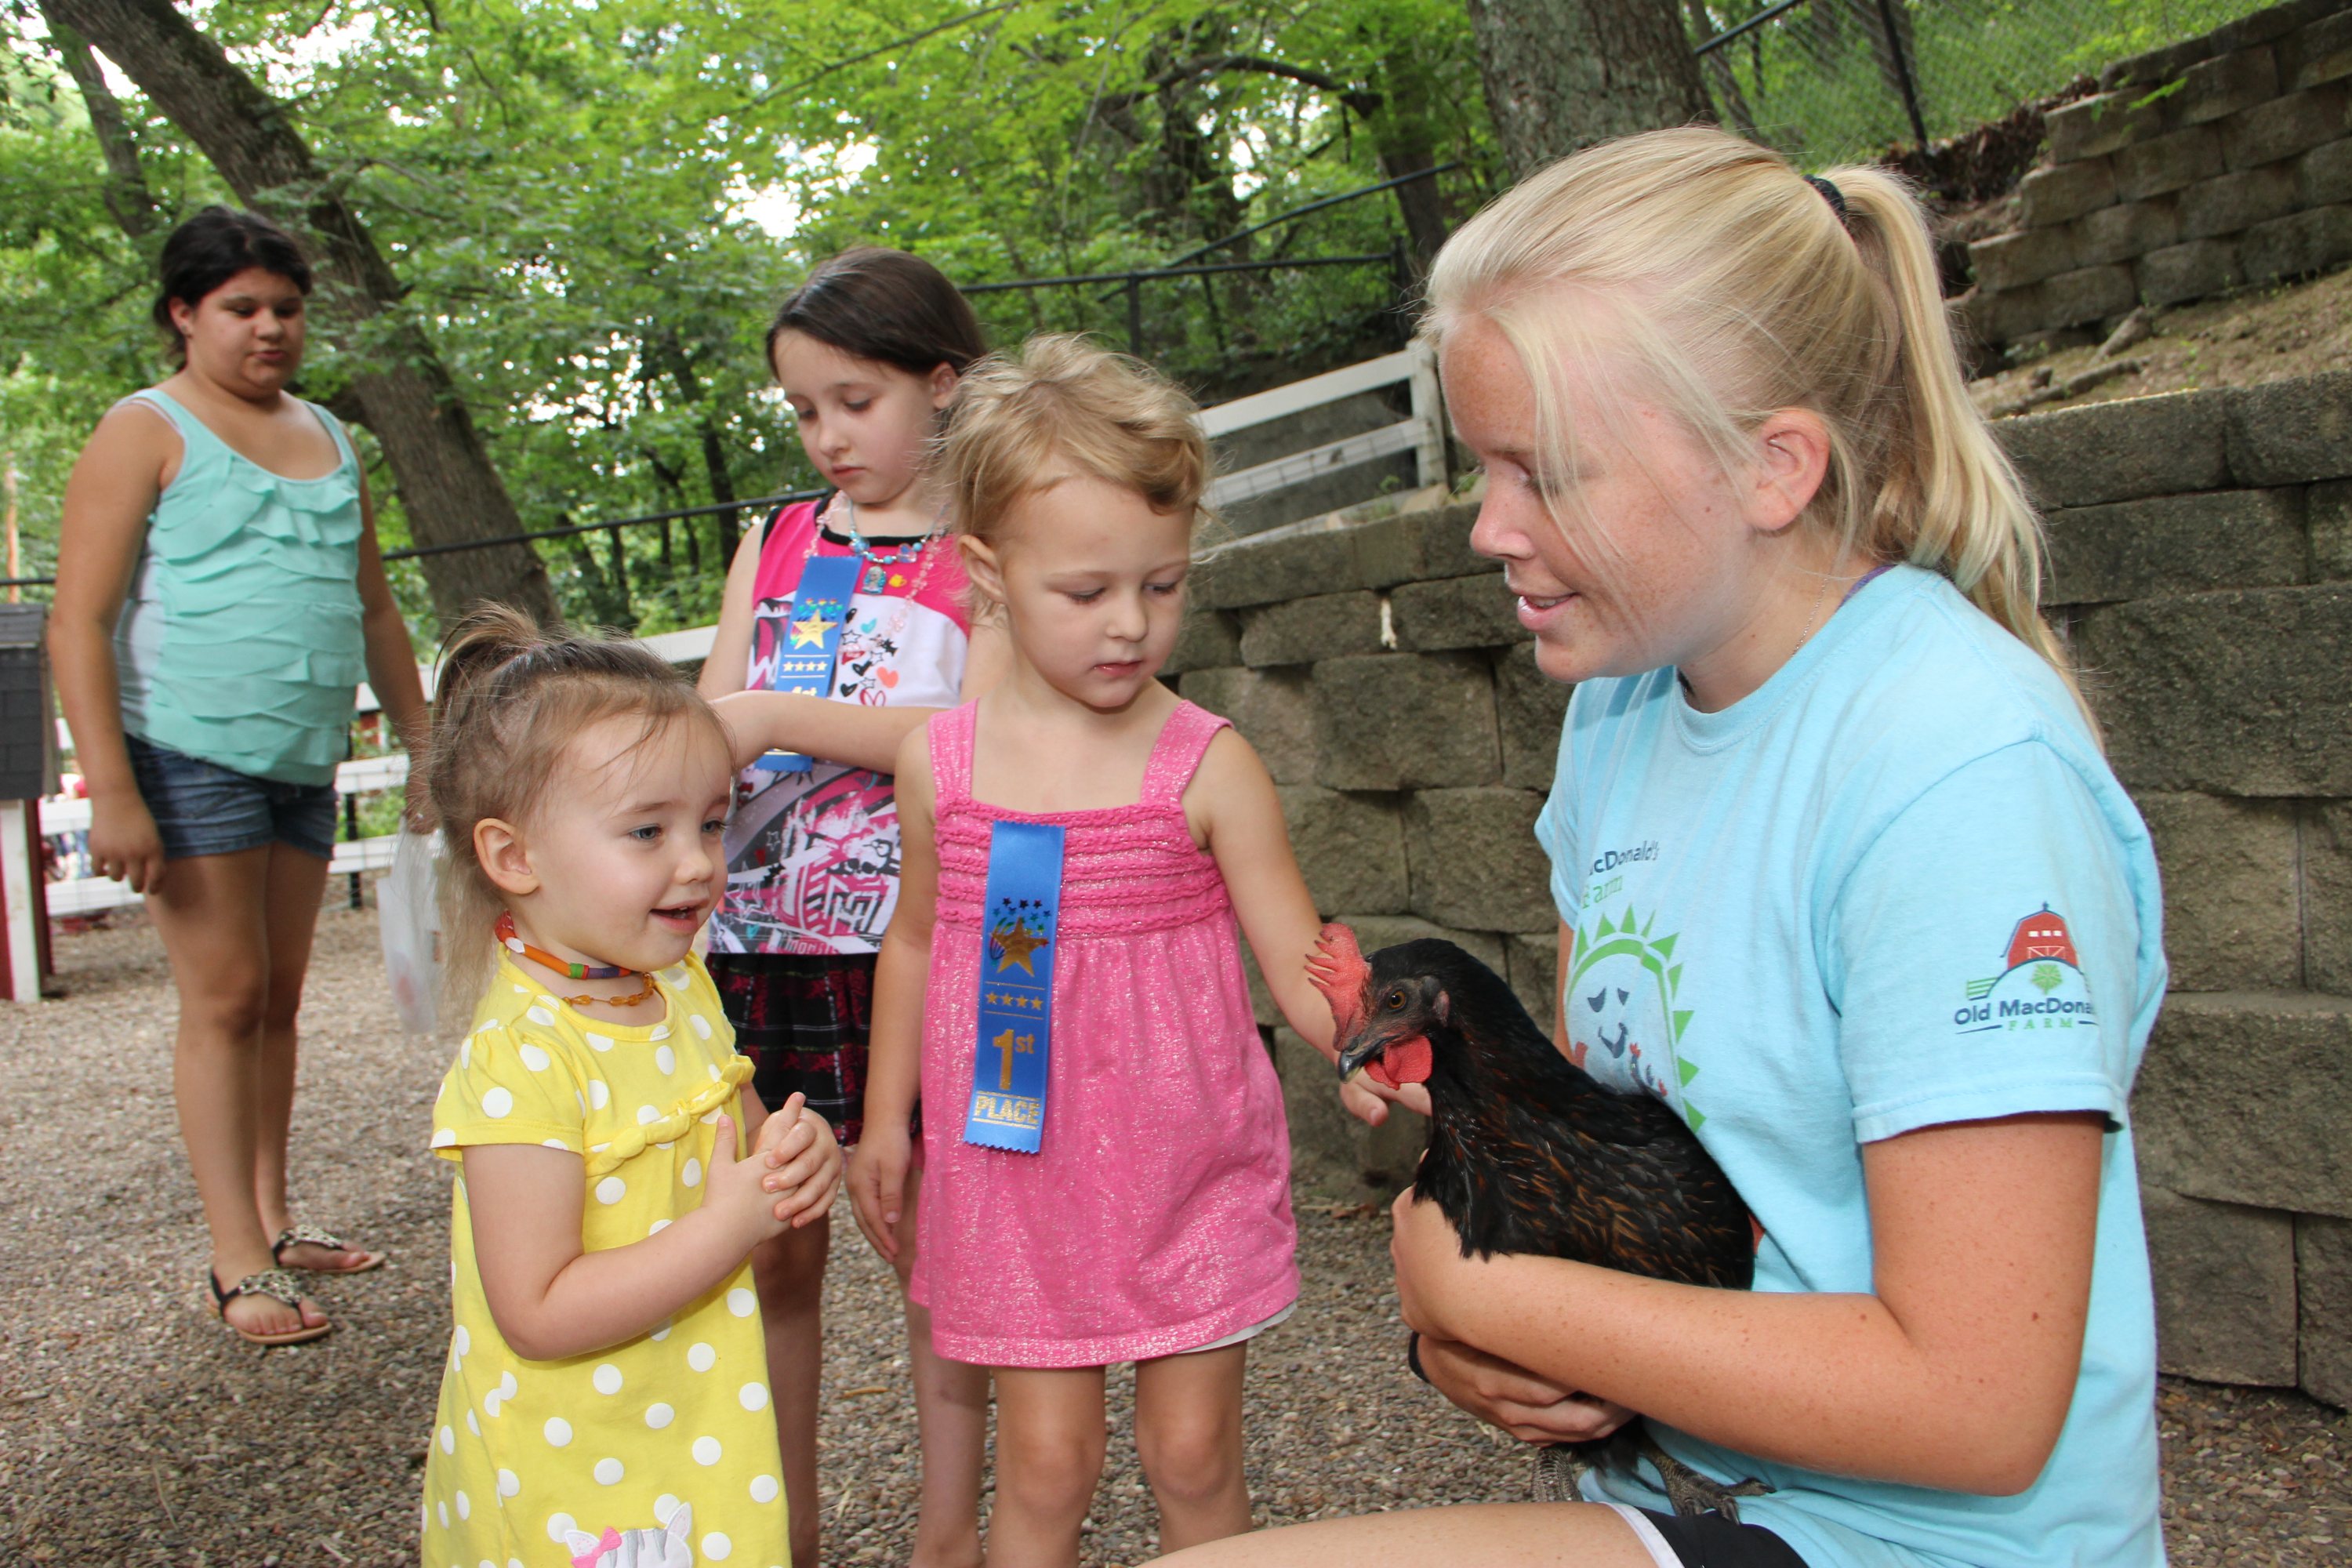 This is a picture of two children petting a rooster at Old MacDonald Farm.